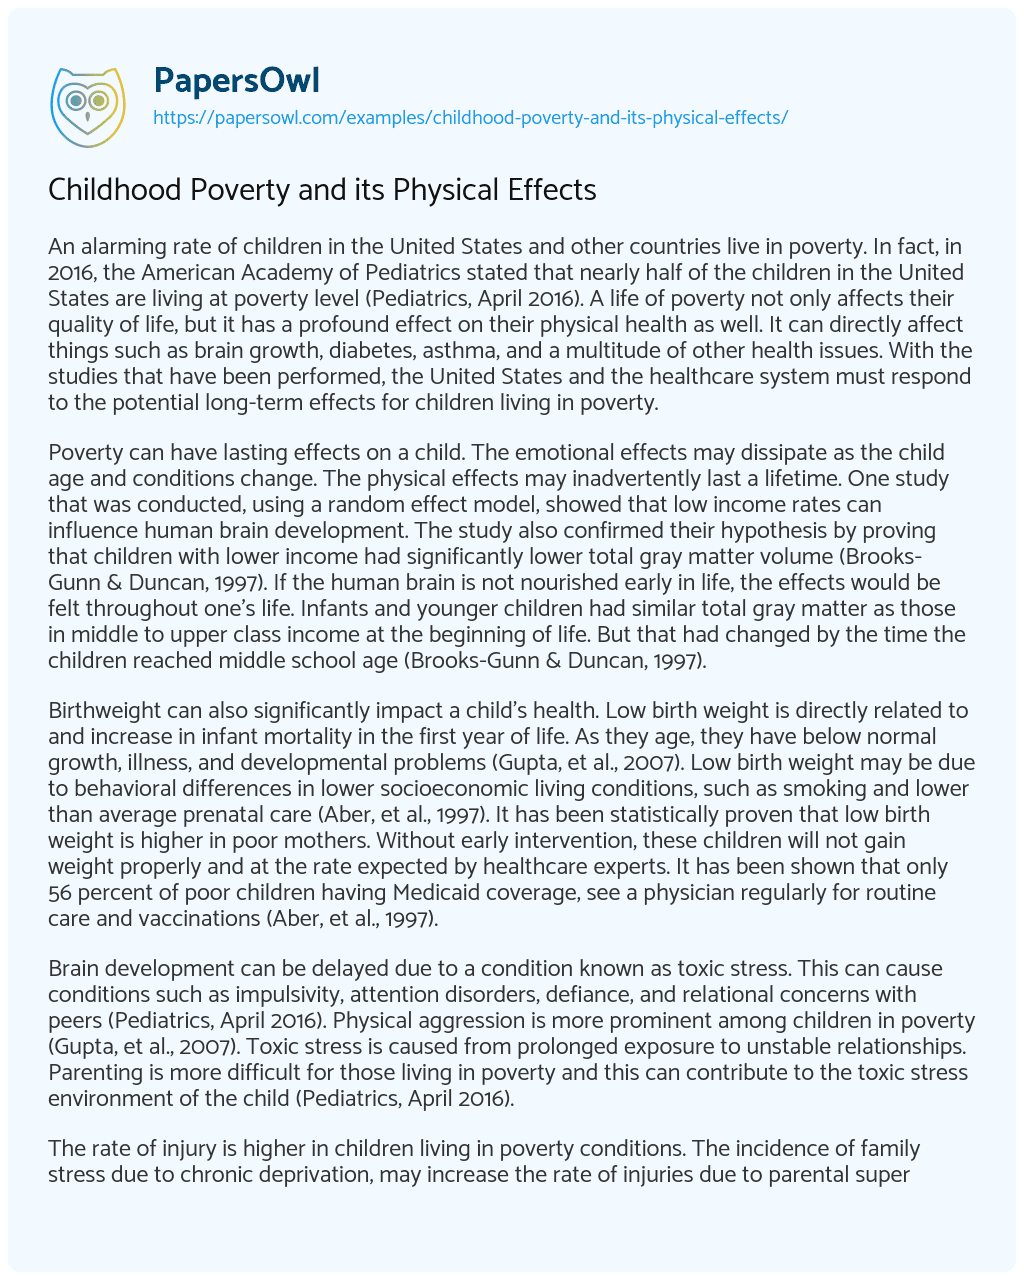 Essay on Childhood Poverty and its Physical Effects